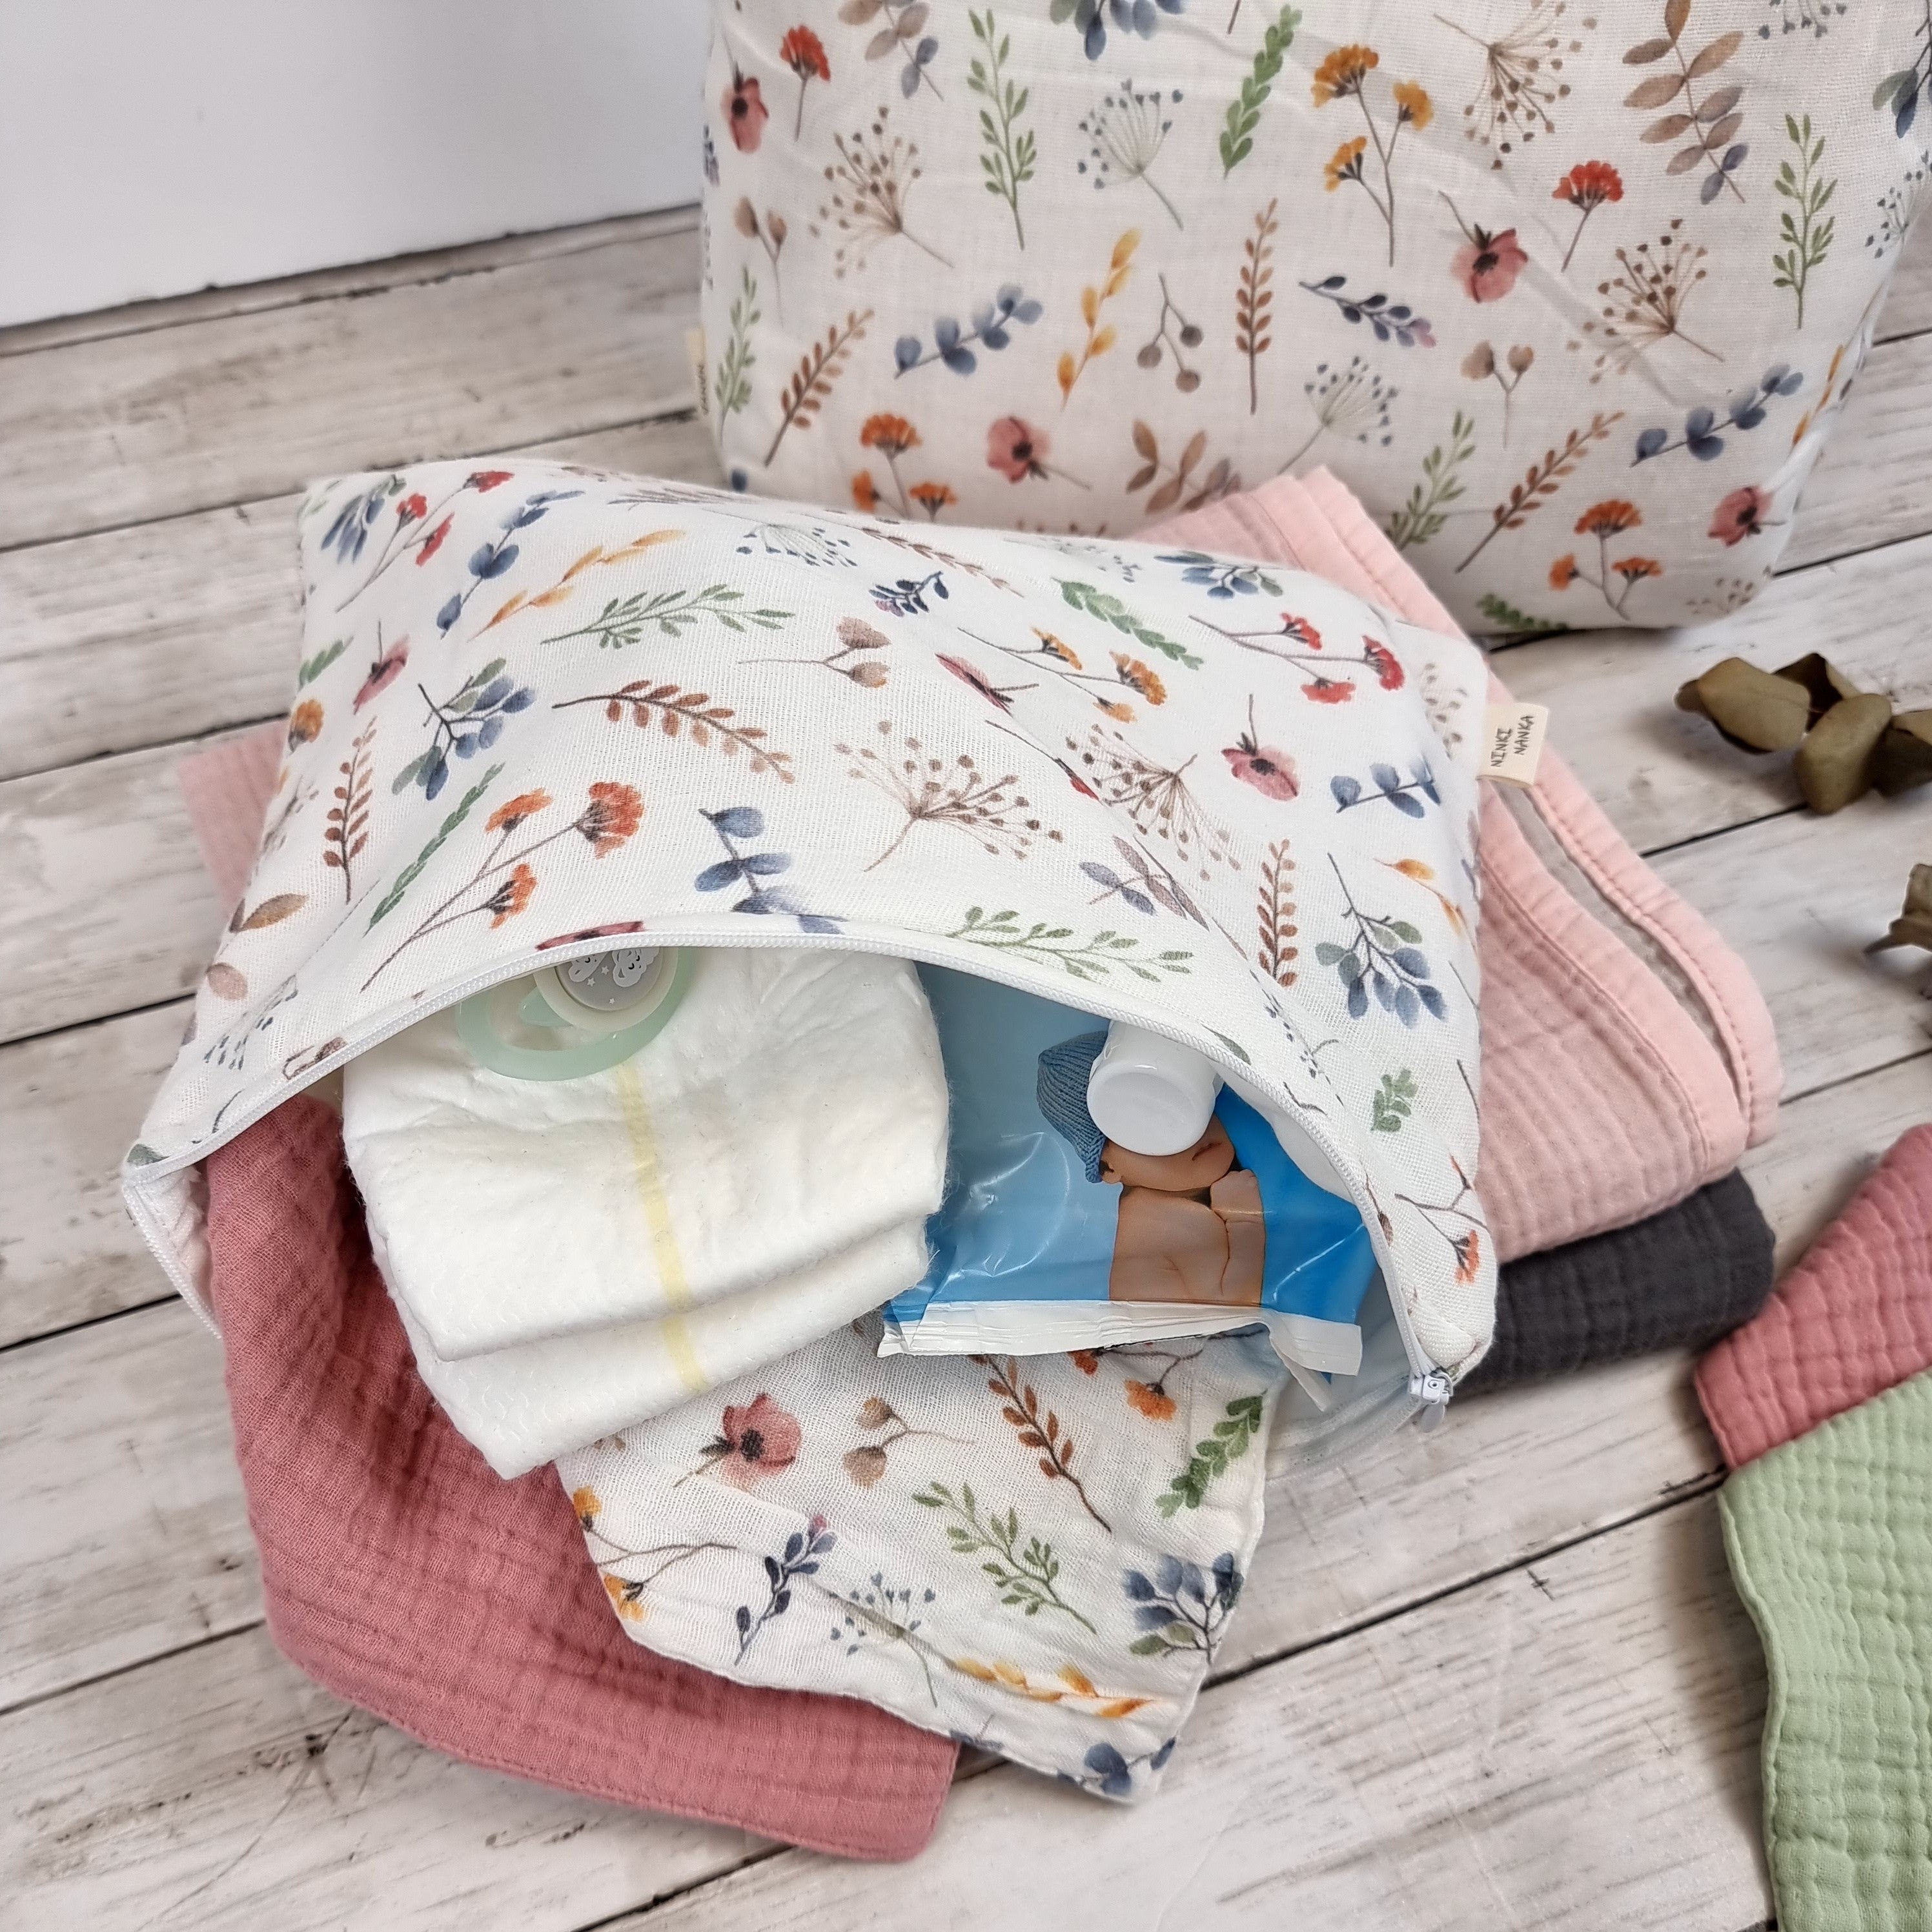 Ninki Nanka Organic Cotton Bed Sheets - the softest purest sleep for your little one